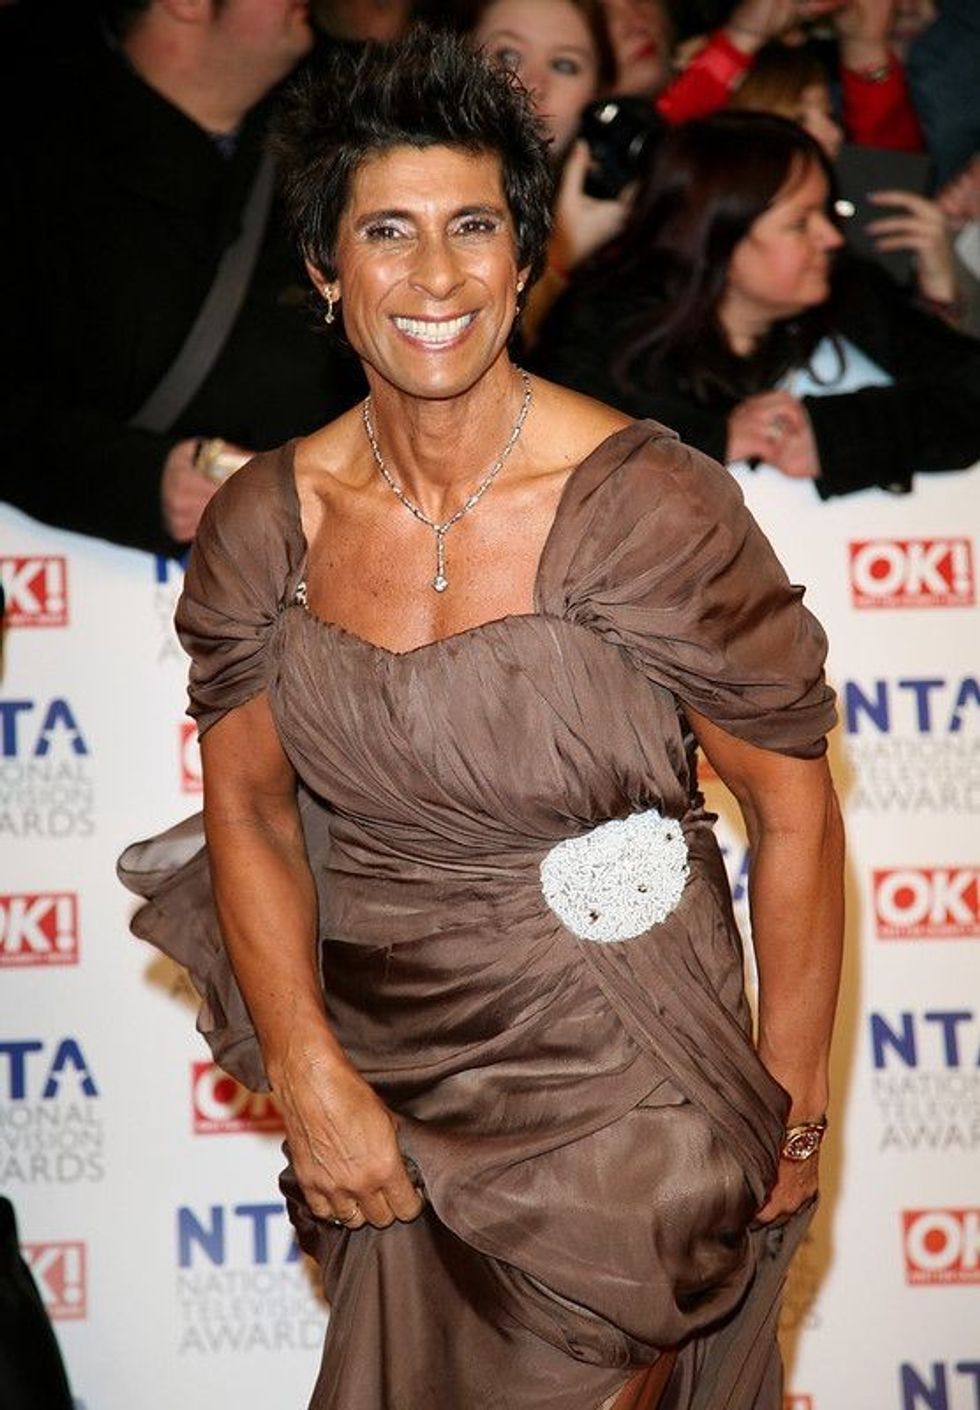 Read about the popular Javelin thrower Fatima Whitbread in this article.